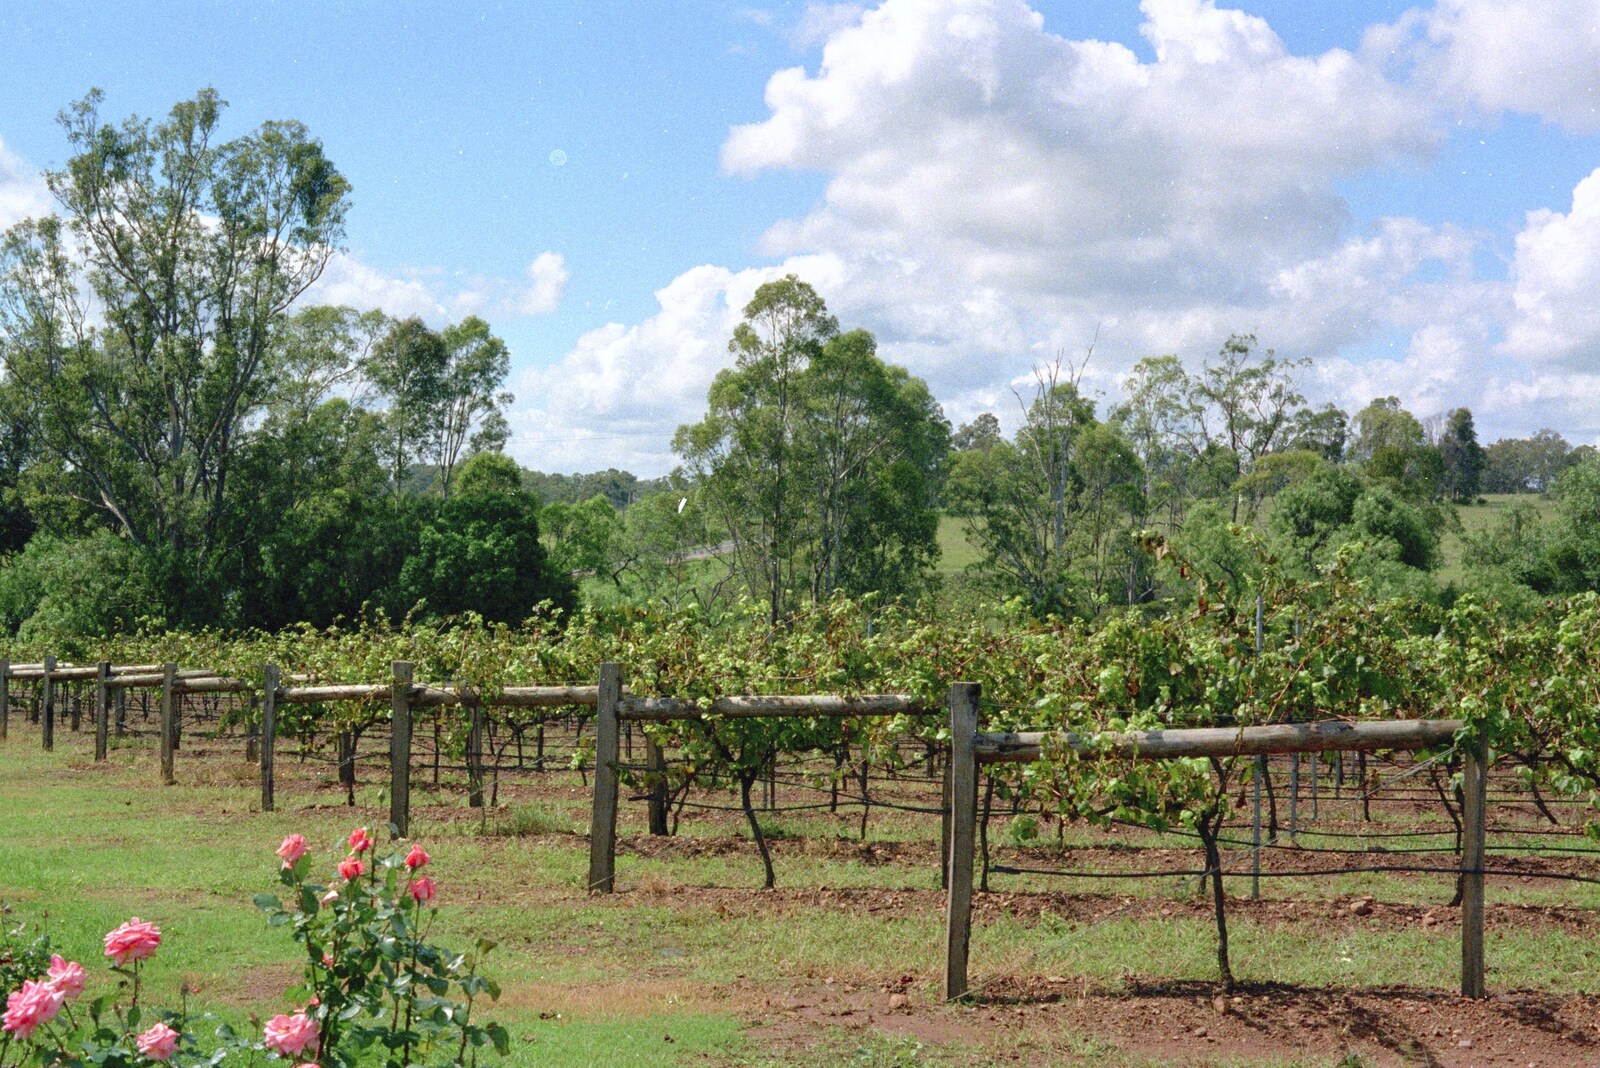 More Wyndham vines from A Trip to the Zoo, Sydney, Australia - 7th April 2000